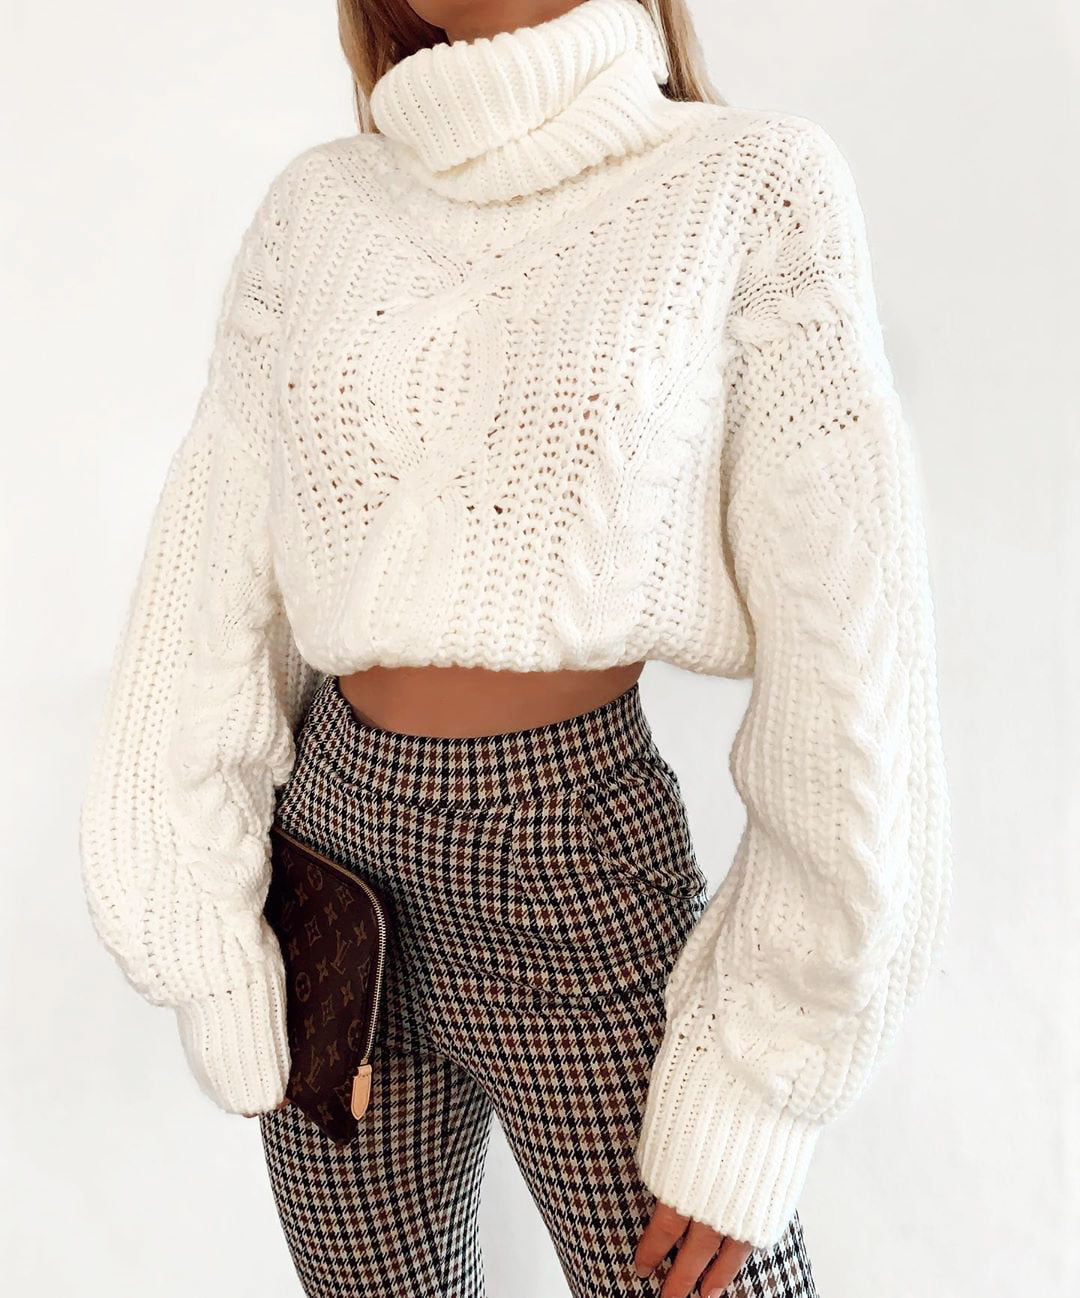 Cute Outfit Ideas For Women In Winter (9)